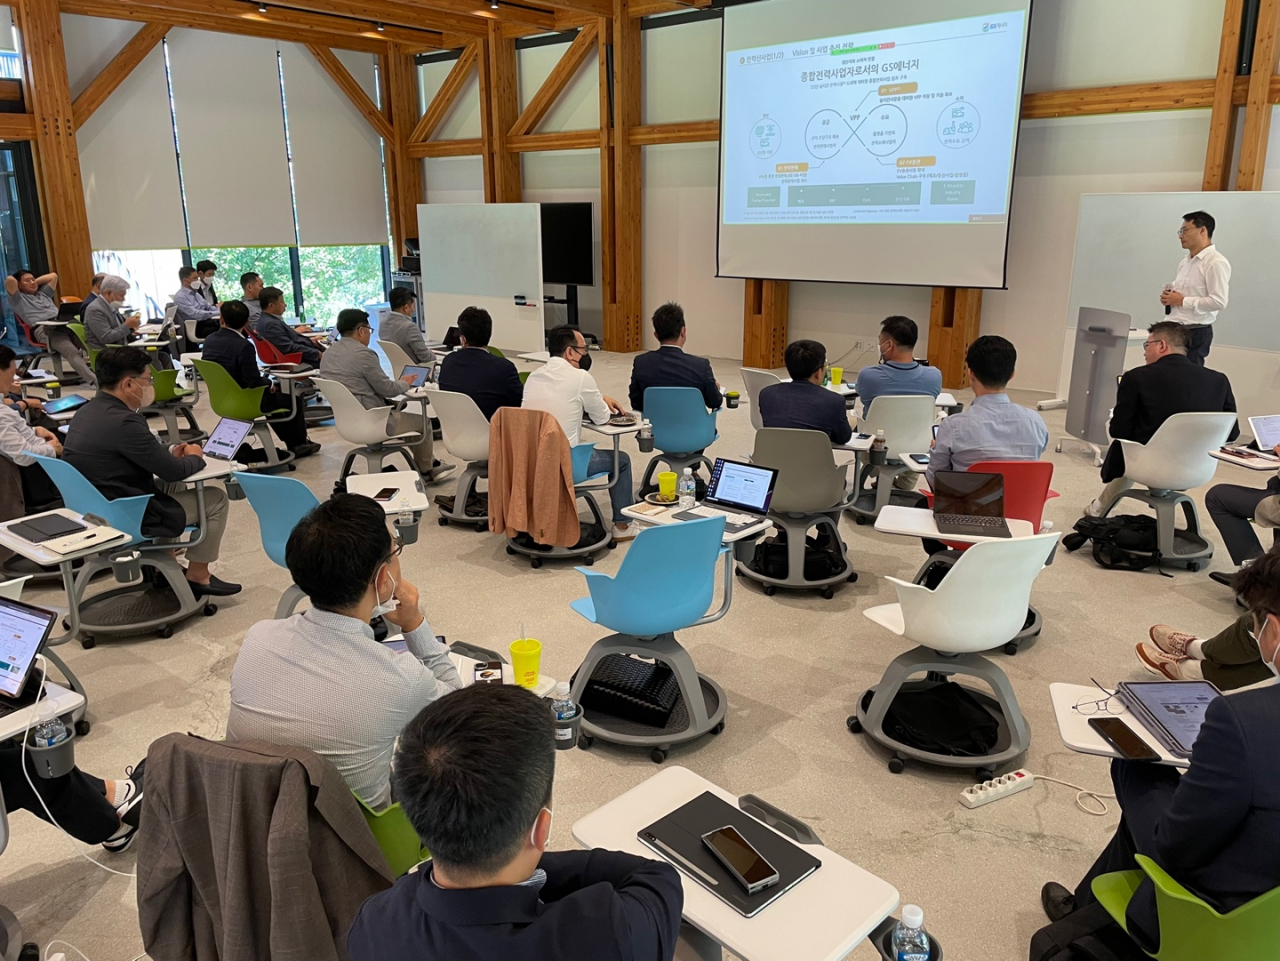 GS Group's executives are sharing ideas on new business strategies at a meeting held on Wednesday at a GS Retail workshop center in Pocheon, Gyeonggi Province. (GS Group)